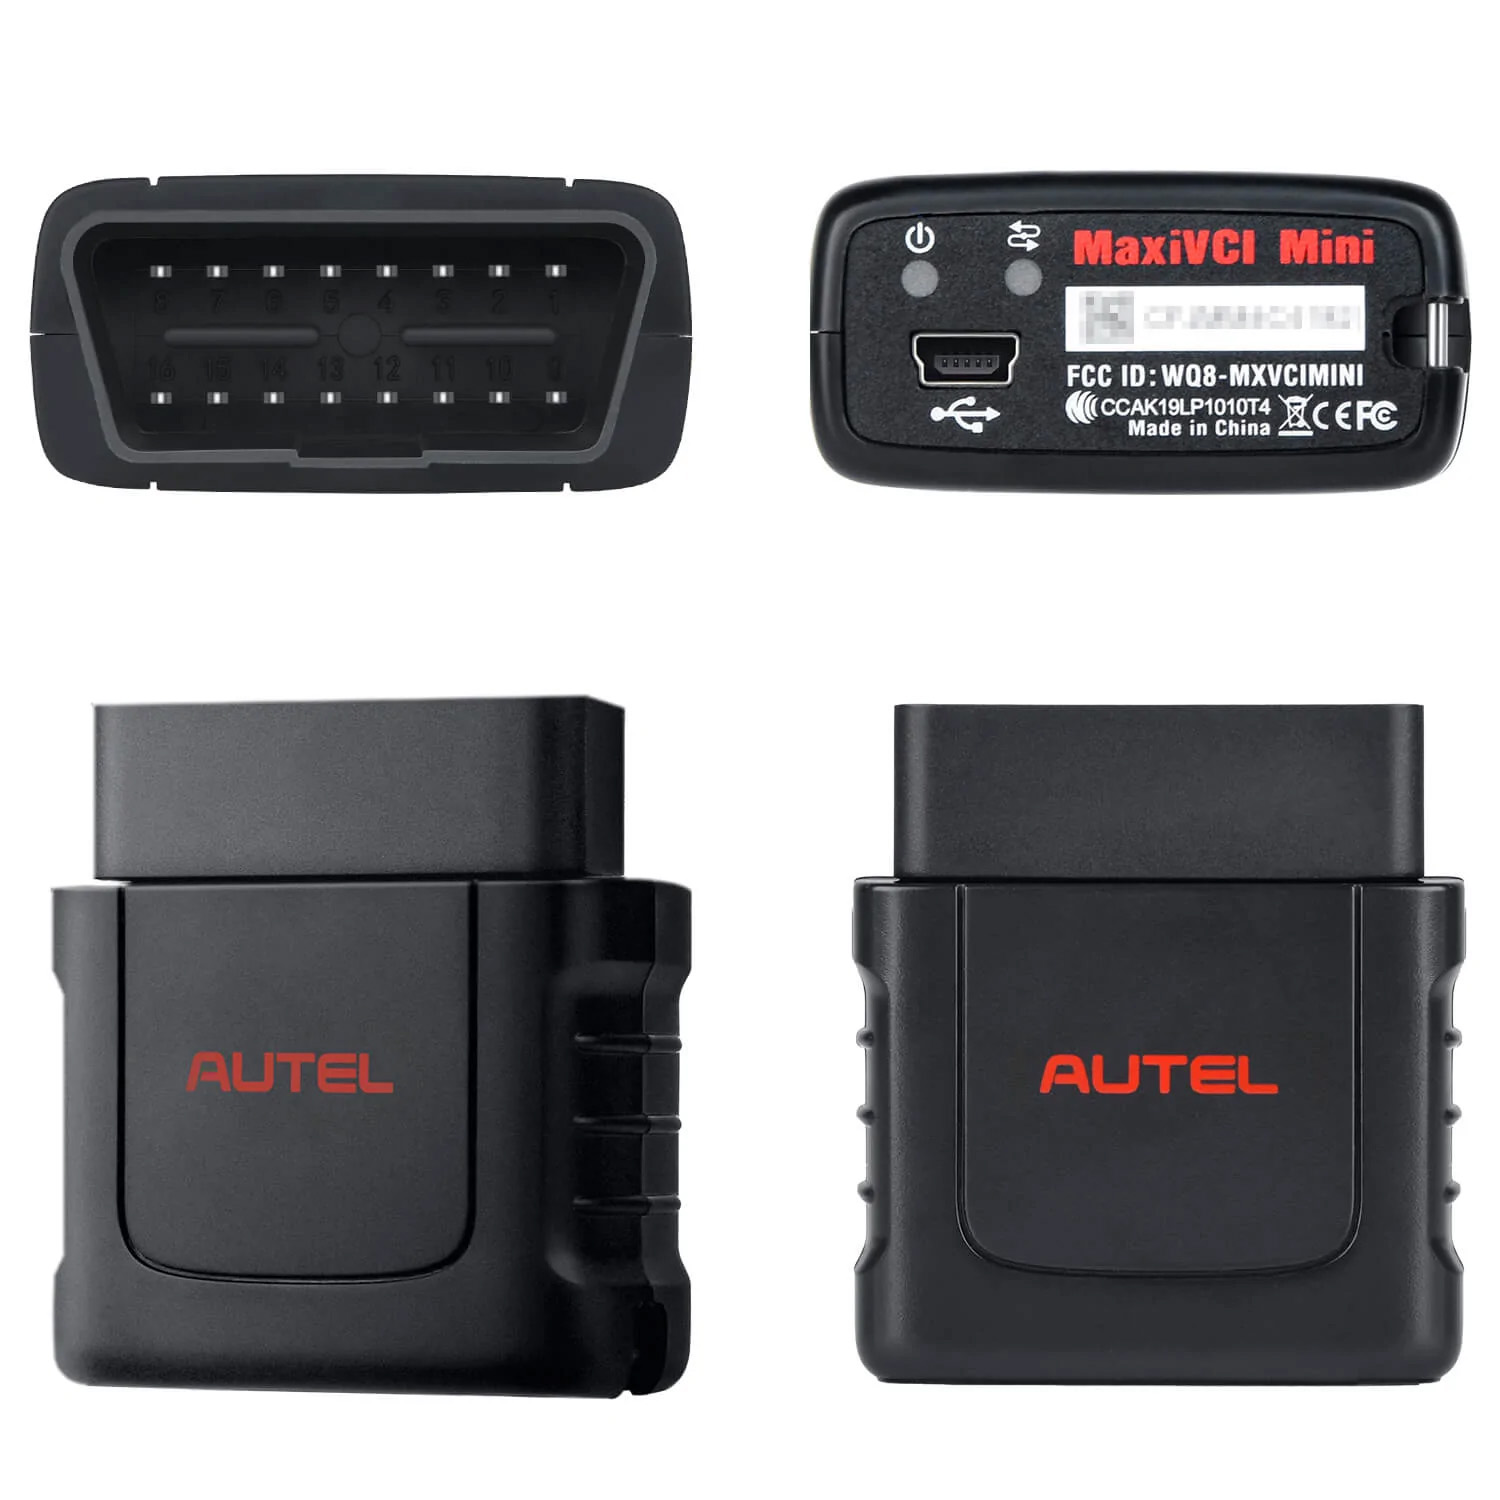 2024 Autel MaxiPRO MP808S KIT with Complete OBD1 Cables and